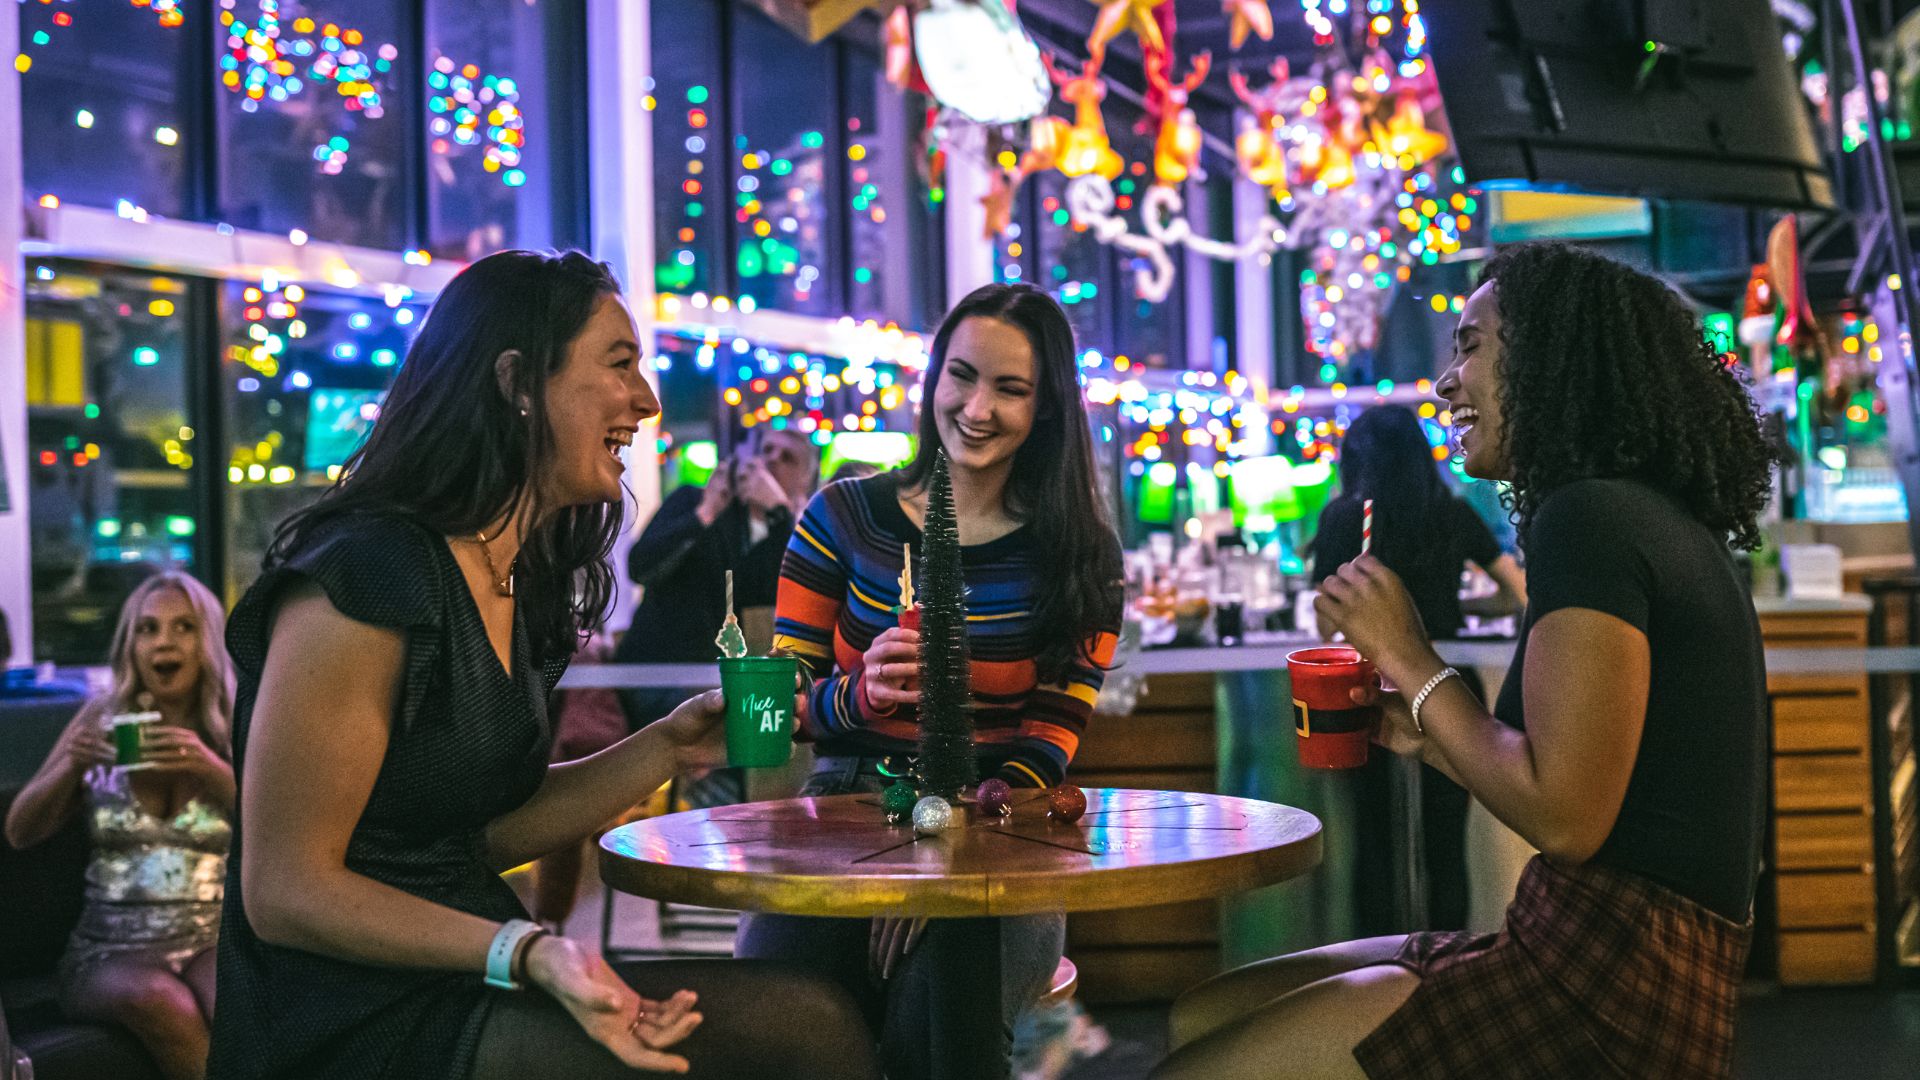 A group of girlfriends cheers at Up on The Rooftop, the holiday pop-up bar at Three Sixty in St. Louis.